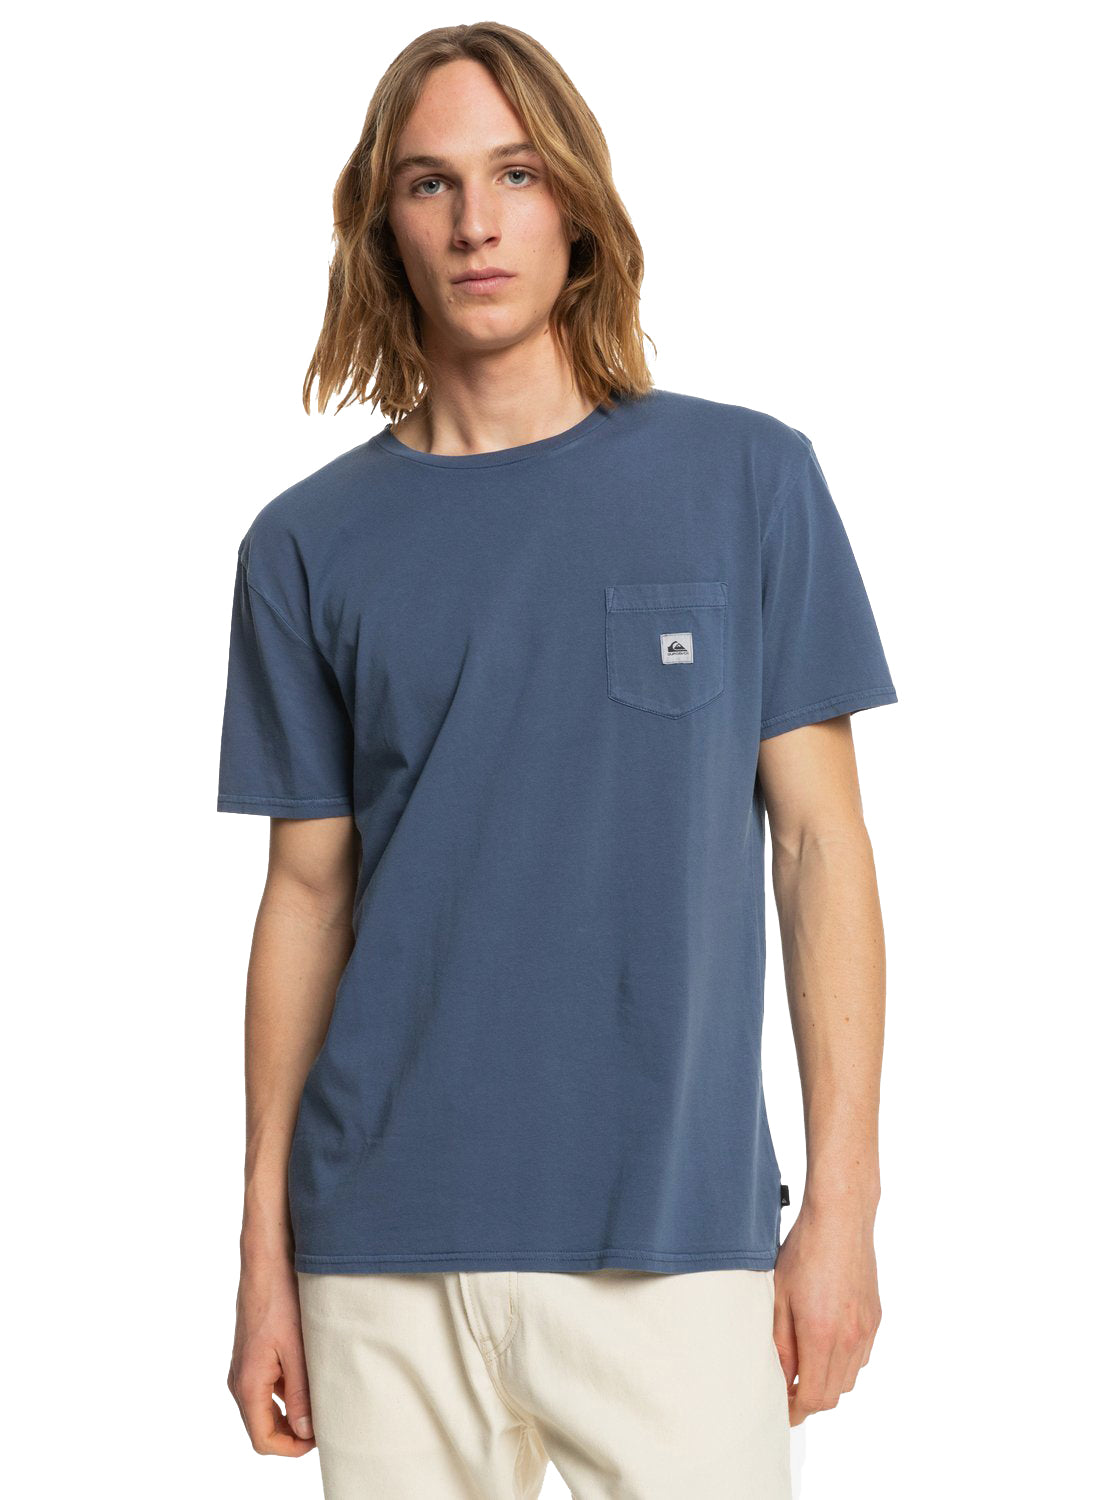 Quiksilver Sub Missions SS Tee